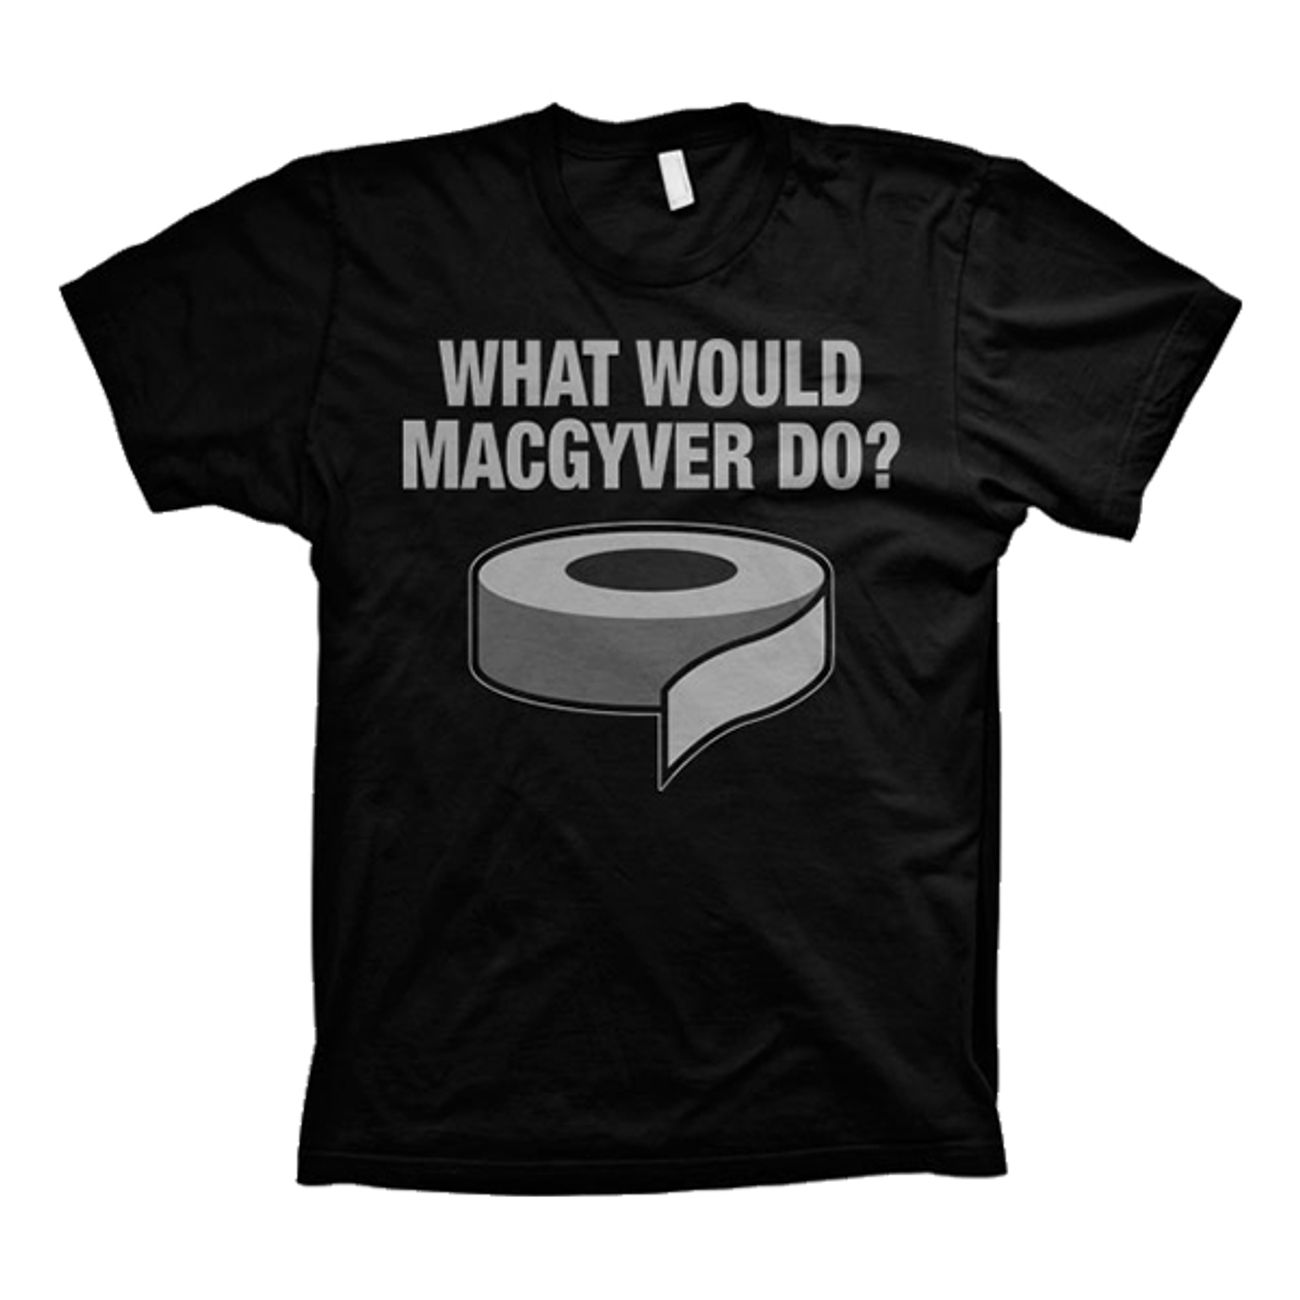 what-would-macgyver-do-t-shirt-75089-1